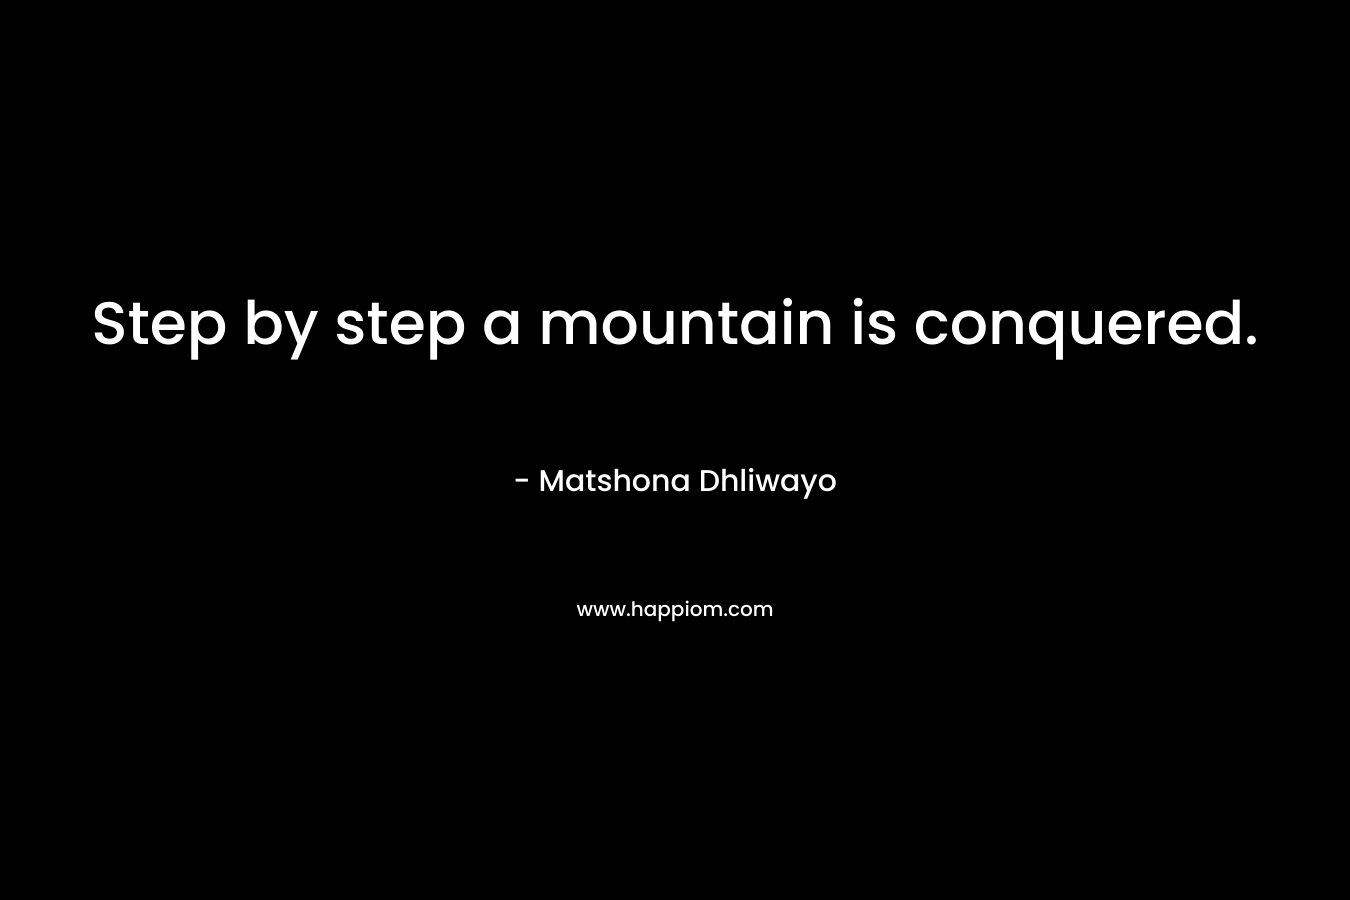 Step by step a mountain is conquered. – Matshona Dhliwayo